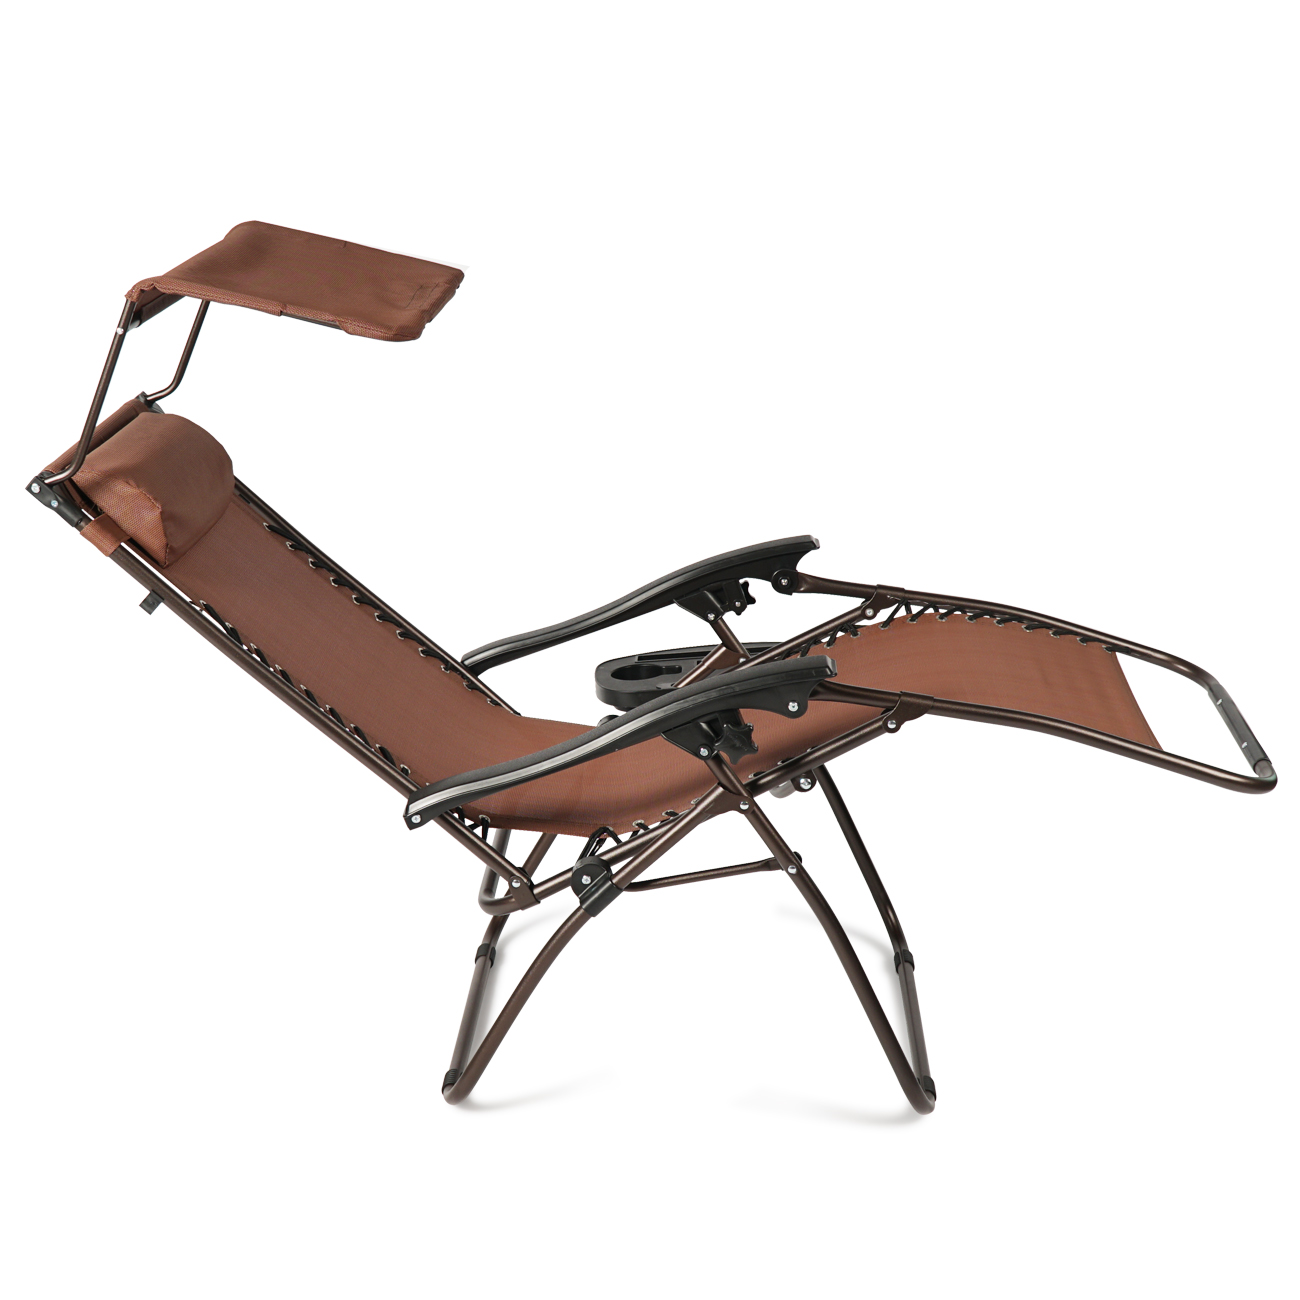 BELLEZE Zero Gravity Chair Shade Blocker Folding Chair Folding Chair Bungee Suspension Canopy Patio Brown - image 2 of 7